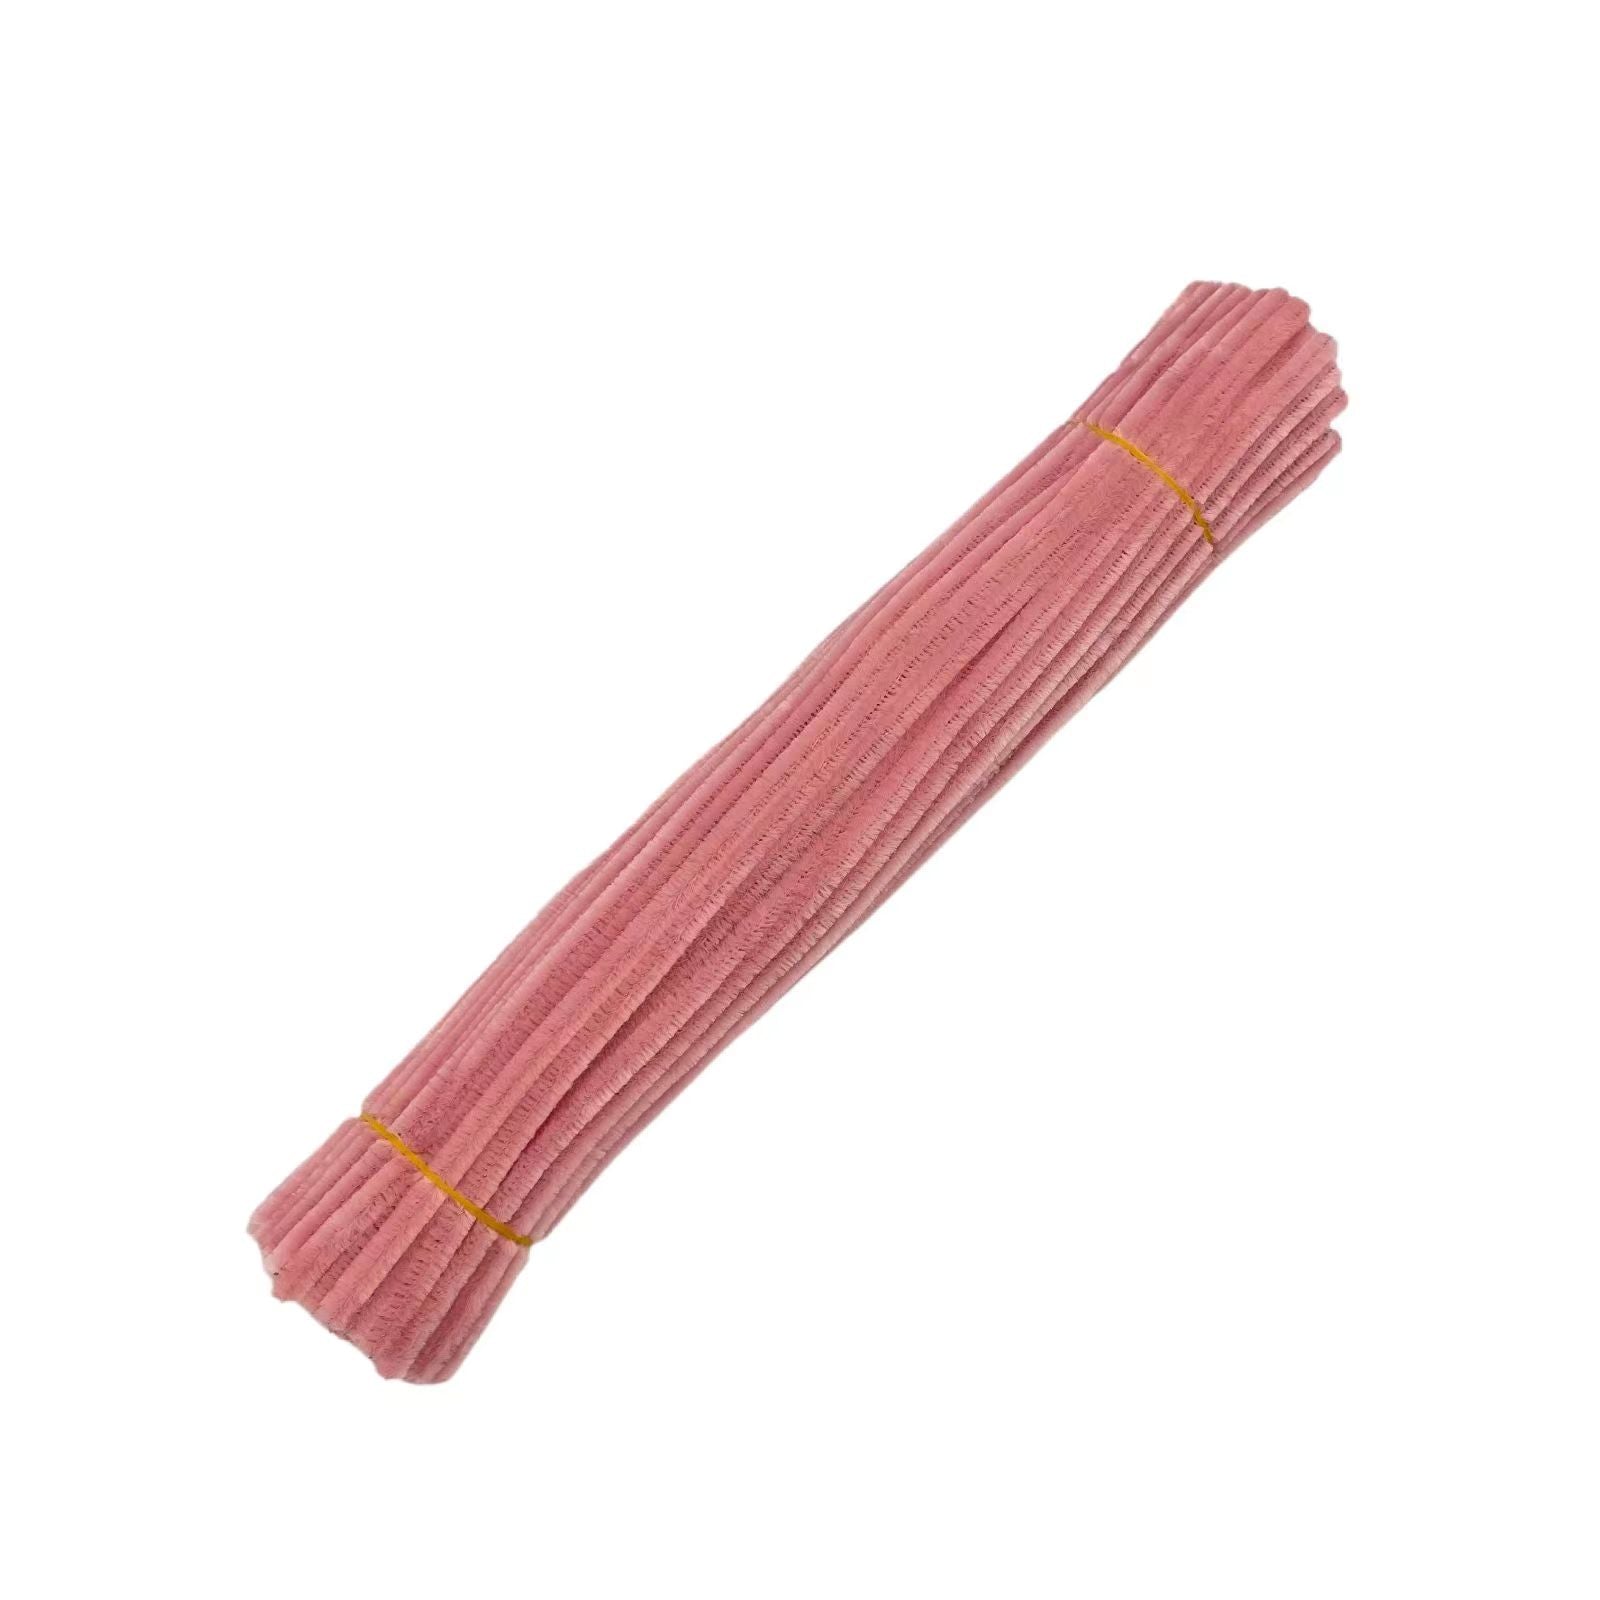 Pipe Cleaners / Chenille Stems: Pink (100)